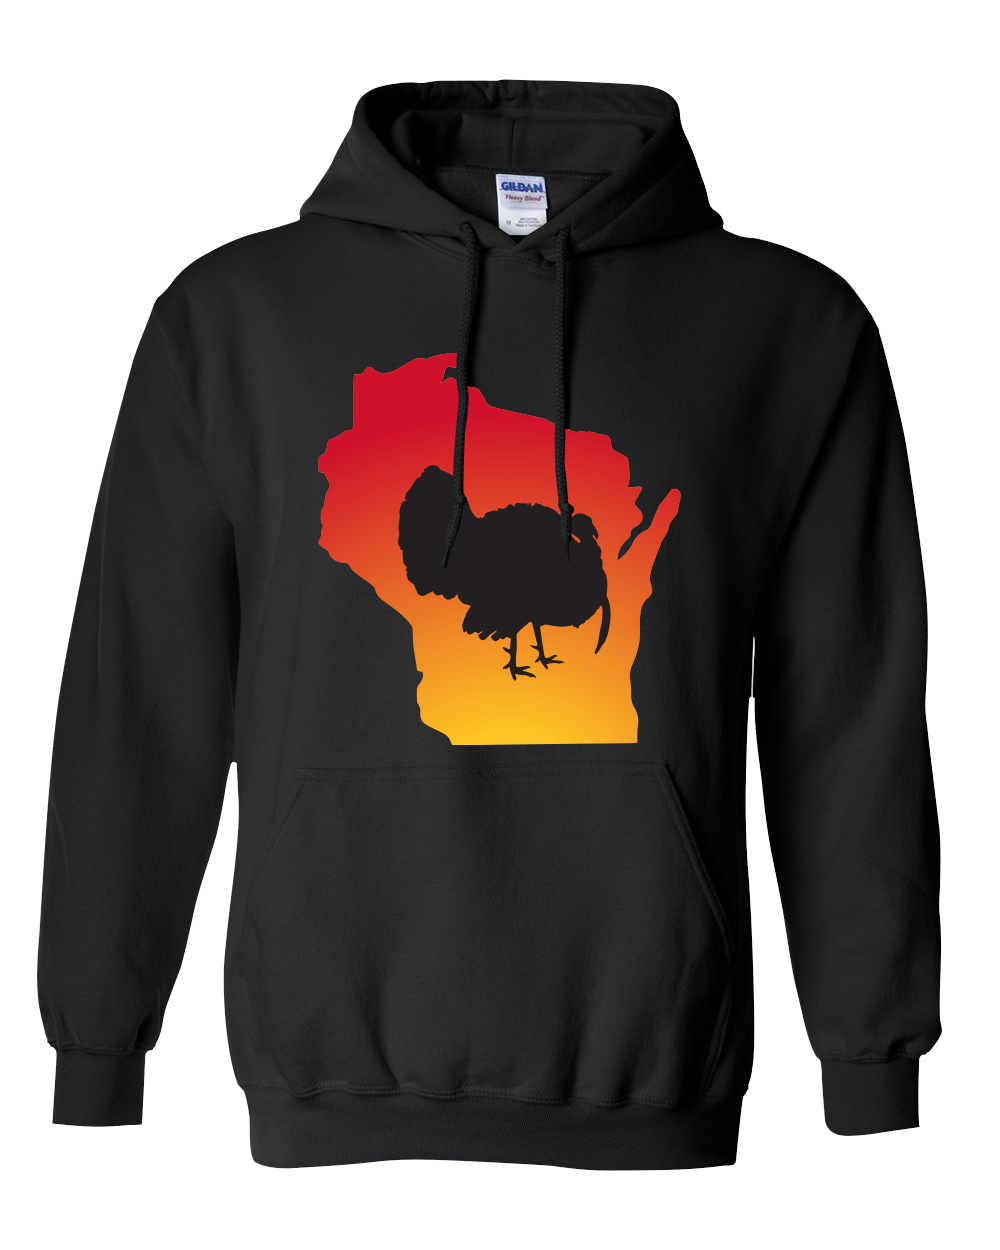 Pullover Hooded Sweatshirt Wisconsin Black Turkey Vibrant Design High Quality Tight Knit Ring Spun Low Maintenance Cotton Printed With The Newest Available Color Transfer Technology